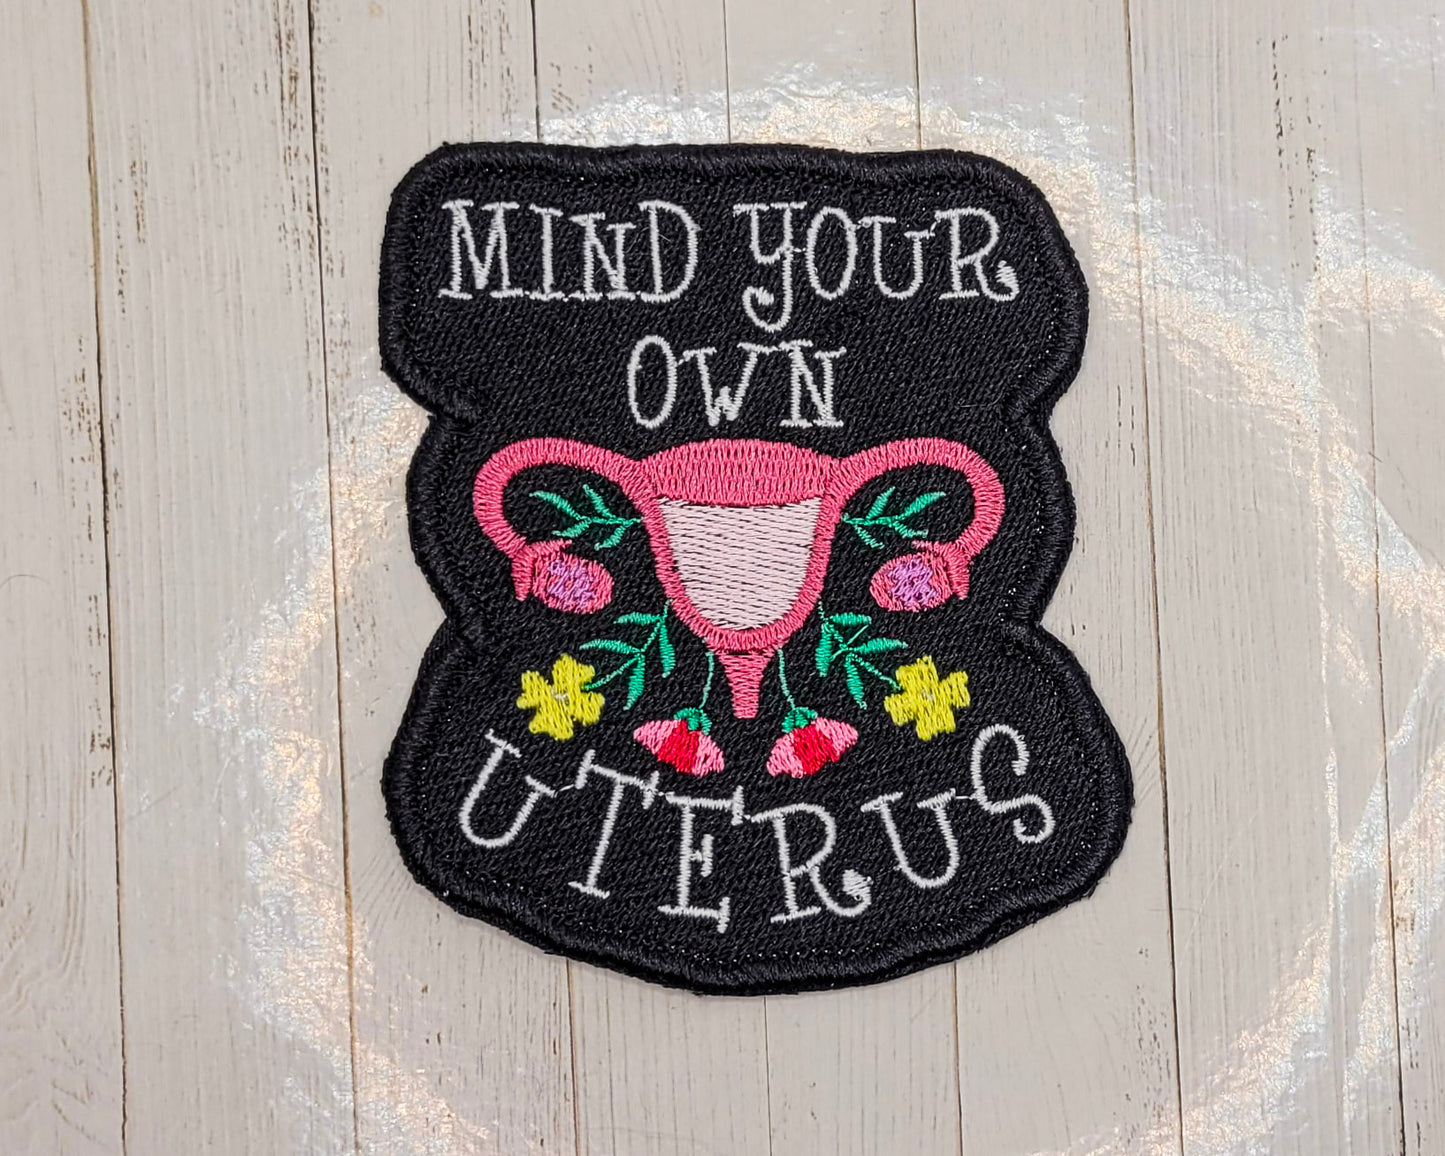 Mind Your Own Uterus Patch